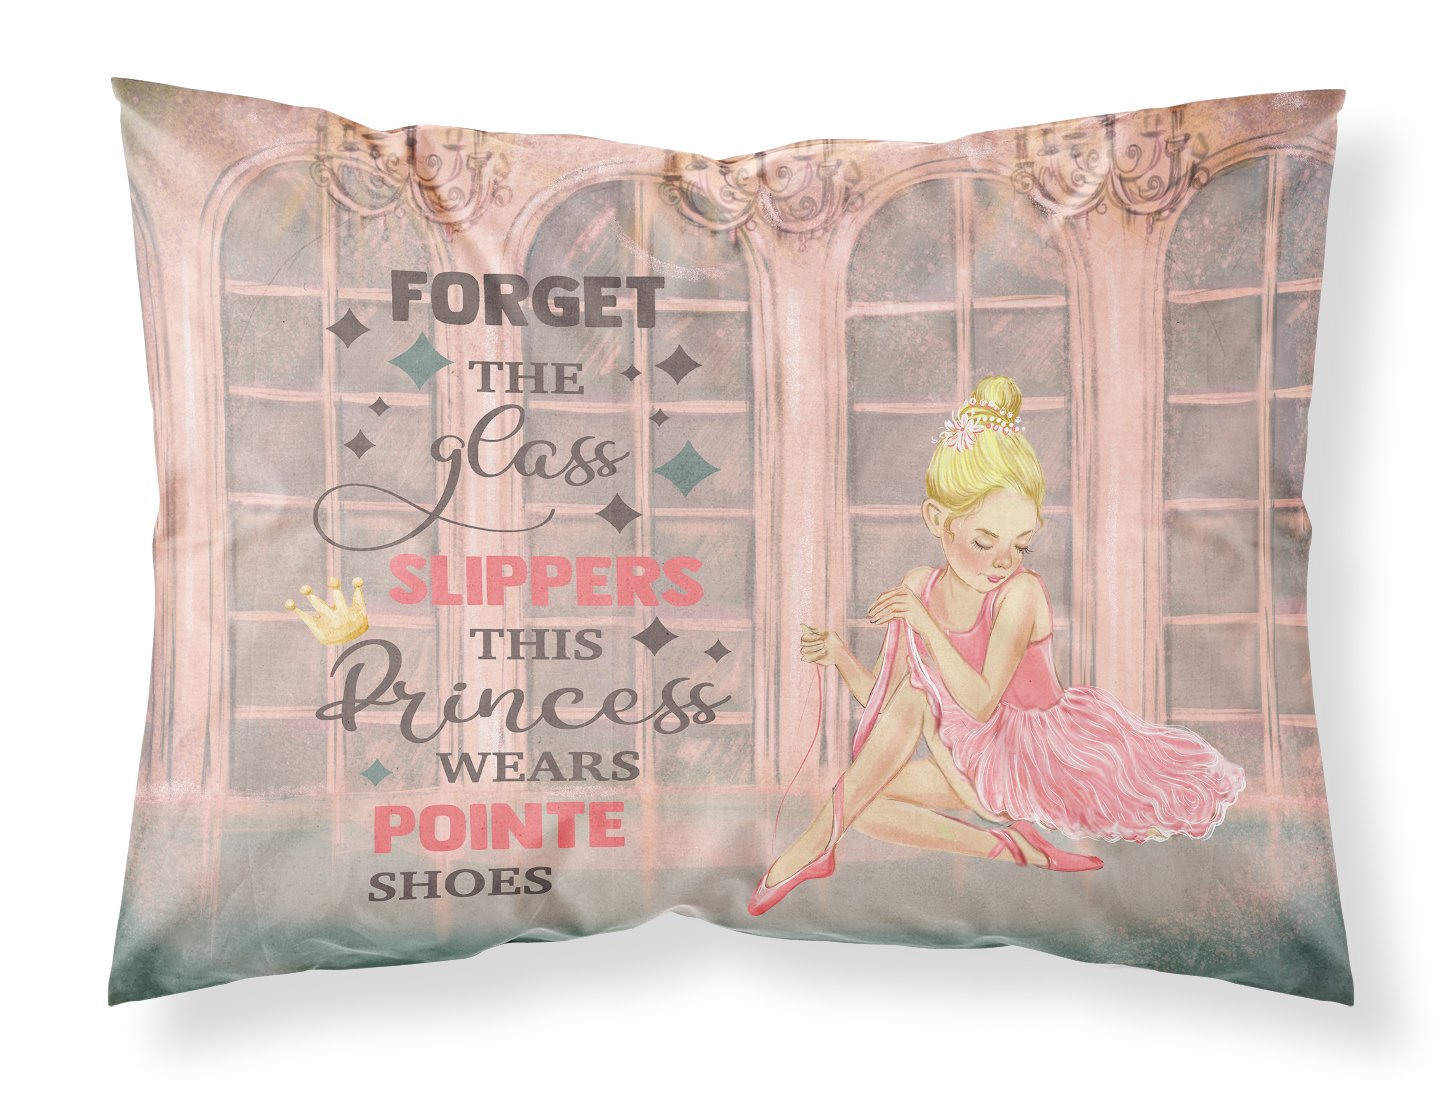 Buy this This Princess Wears Pionte Shoes Dance Fabric Standard Pillowcase